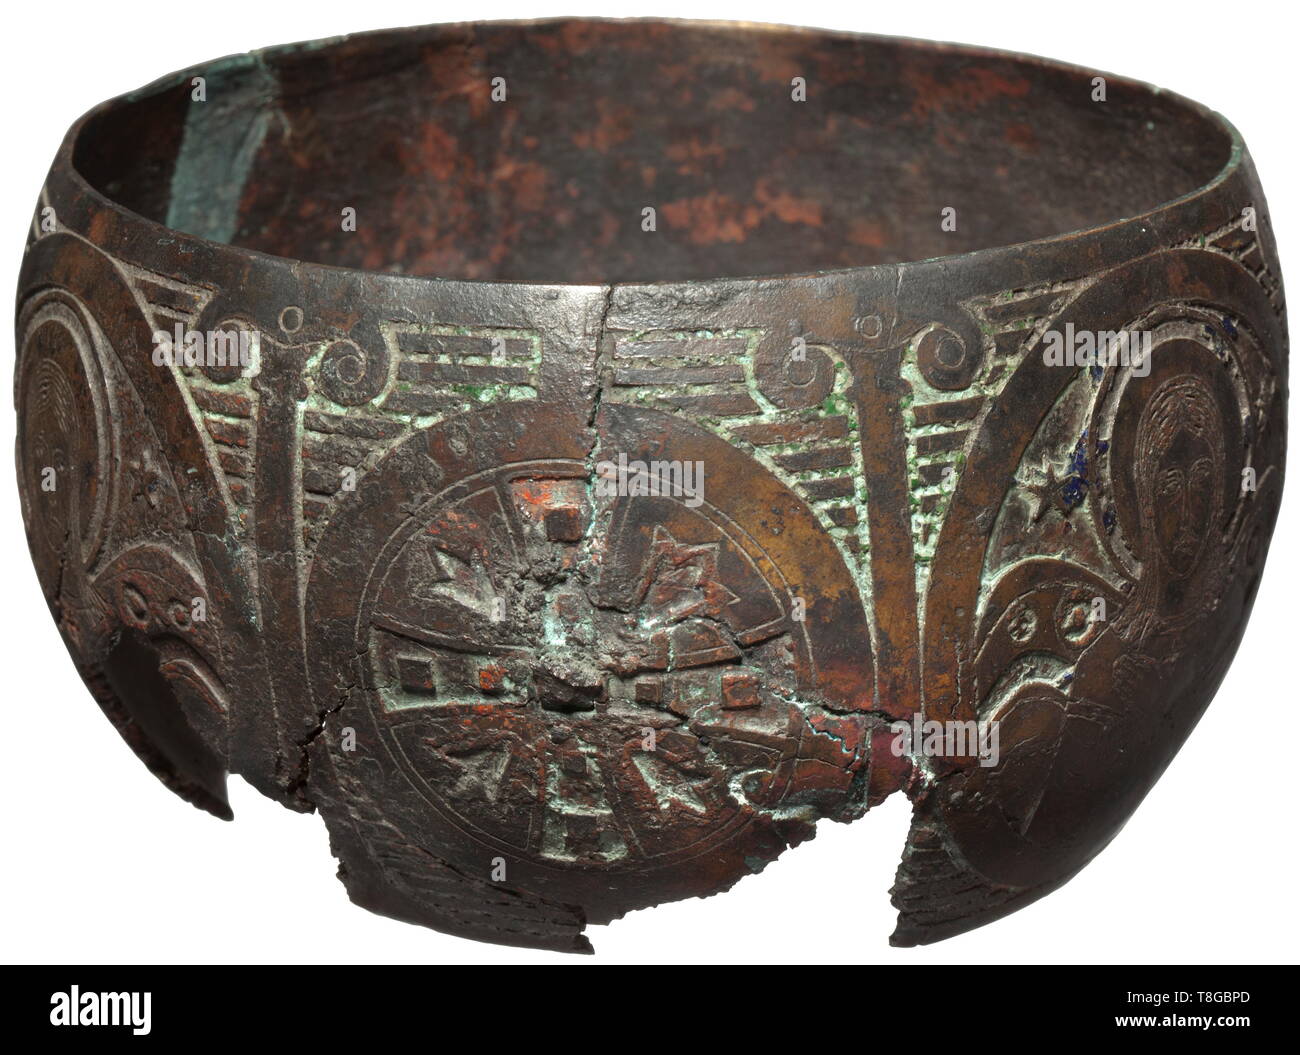 A Byzantine engraved and enamelled node, 10th - 12th century AD Bronze with black-brown pyre patina. Curved, round body with continuous, finely engraved depiction of Christ and Mary, each amid cross and pillar motifs. The engravings with remnants of multi-coloured enamel. Several cracks and two larger defects. Diameter 14 cm. Sophisticated and probably originally gilt part of a cup or the like. historic, historical, middle ages, Additional-Rights-Clearance-Info-Not-Available Stock Photo